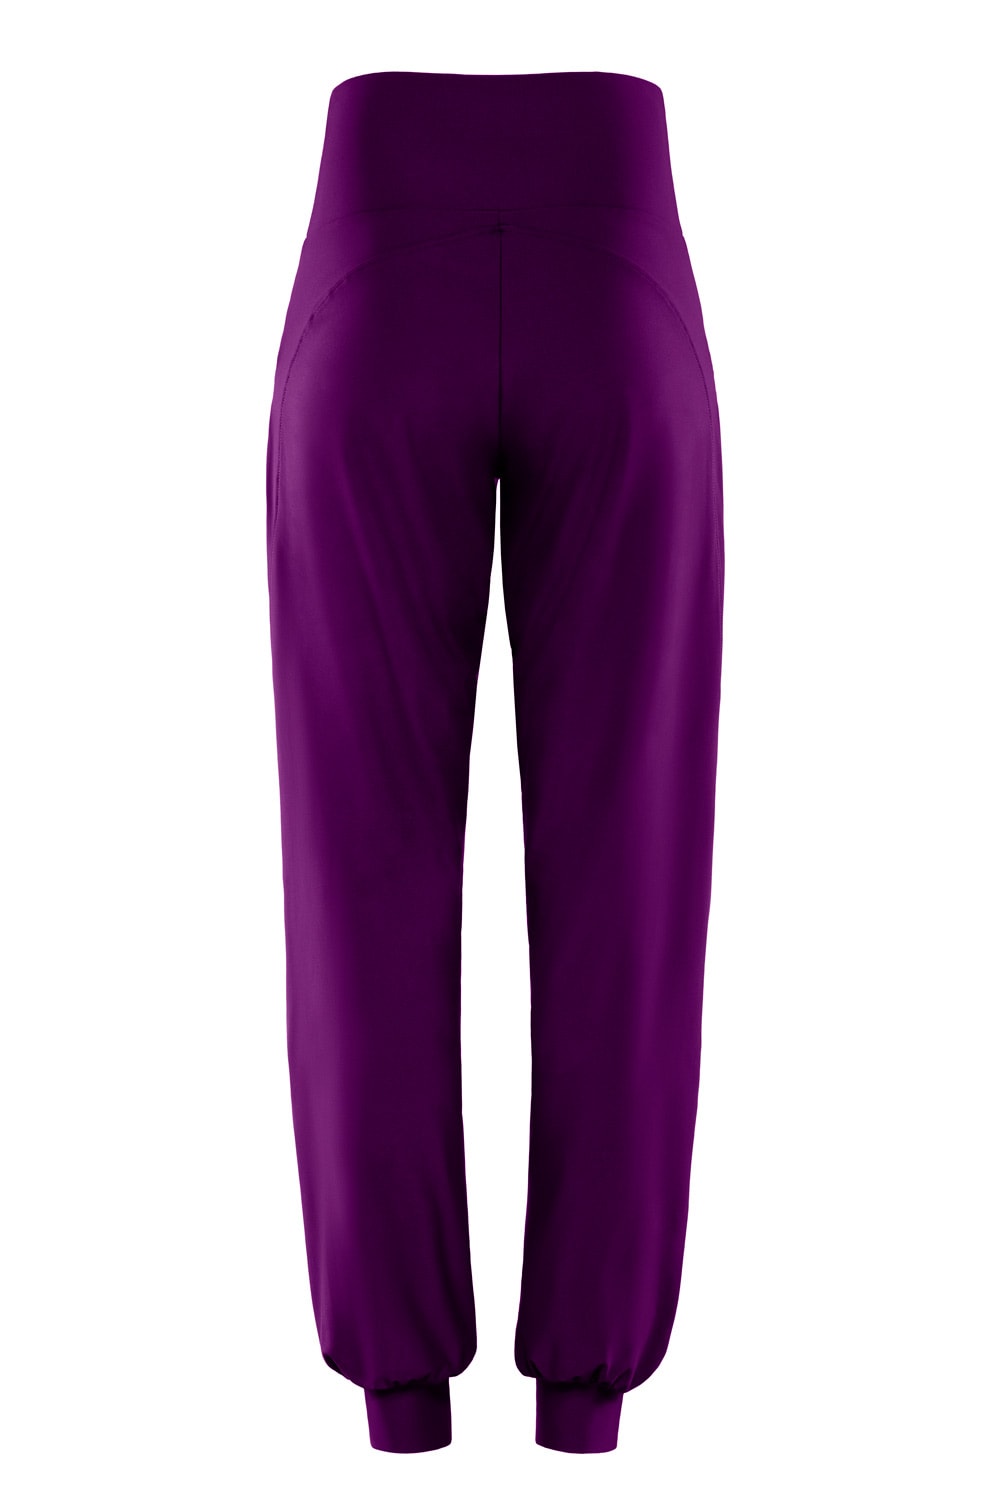 Finde Winshape Sporthose »Functional Comfort Leisure Time Trousers  LEI101C«, High Waist auf